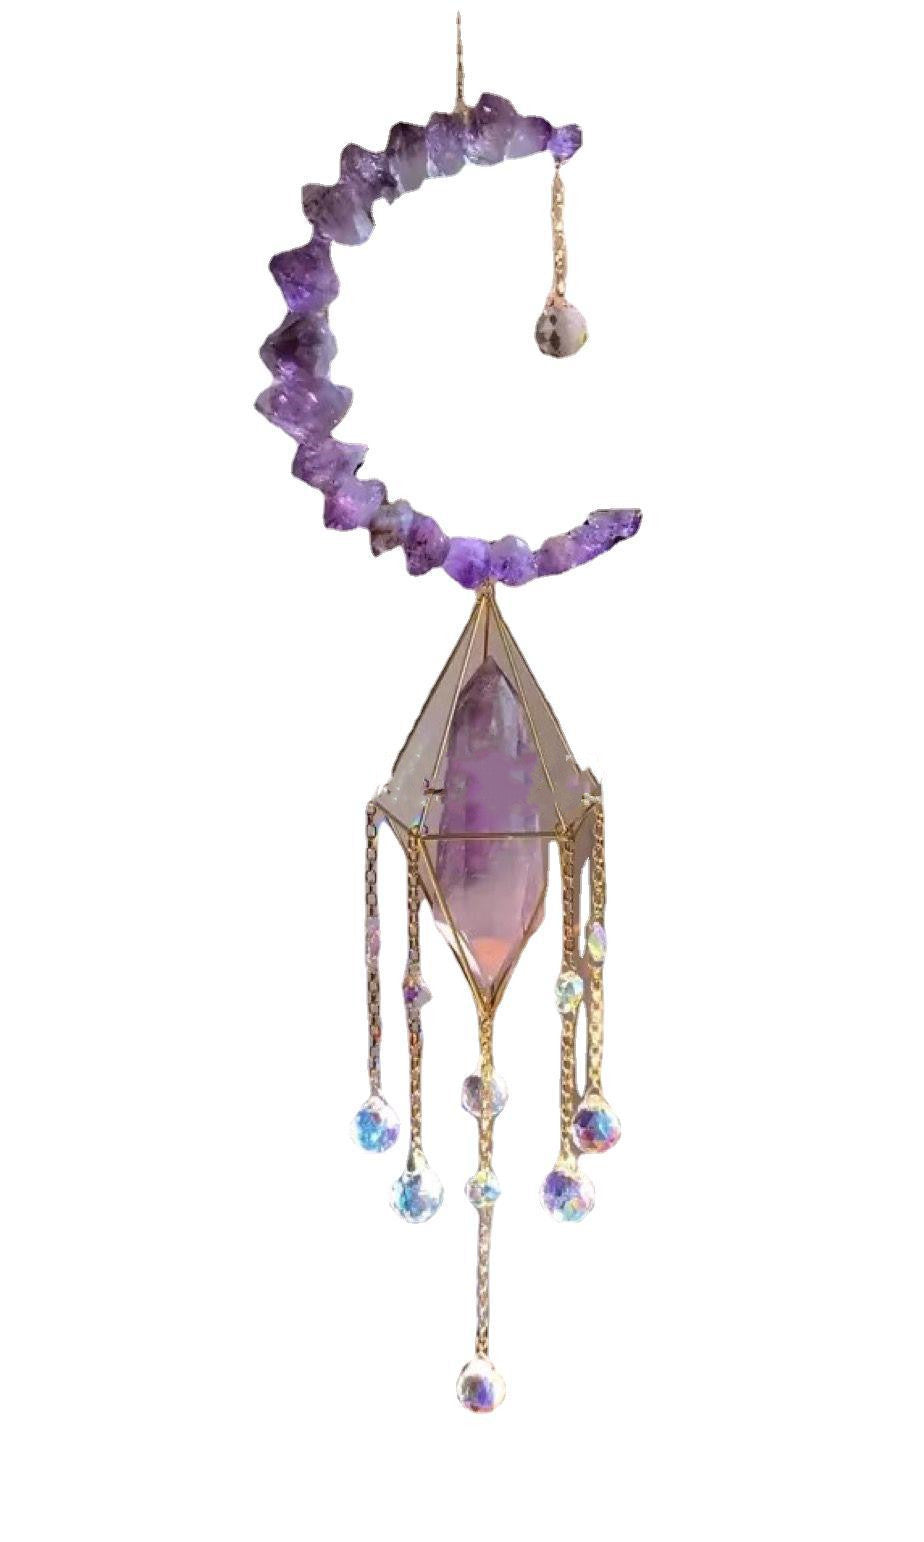 Garden Wind Chimes Crystal Wind Chimes Amethyst Crescent Wind Chimes